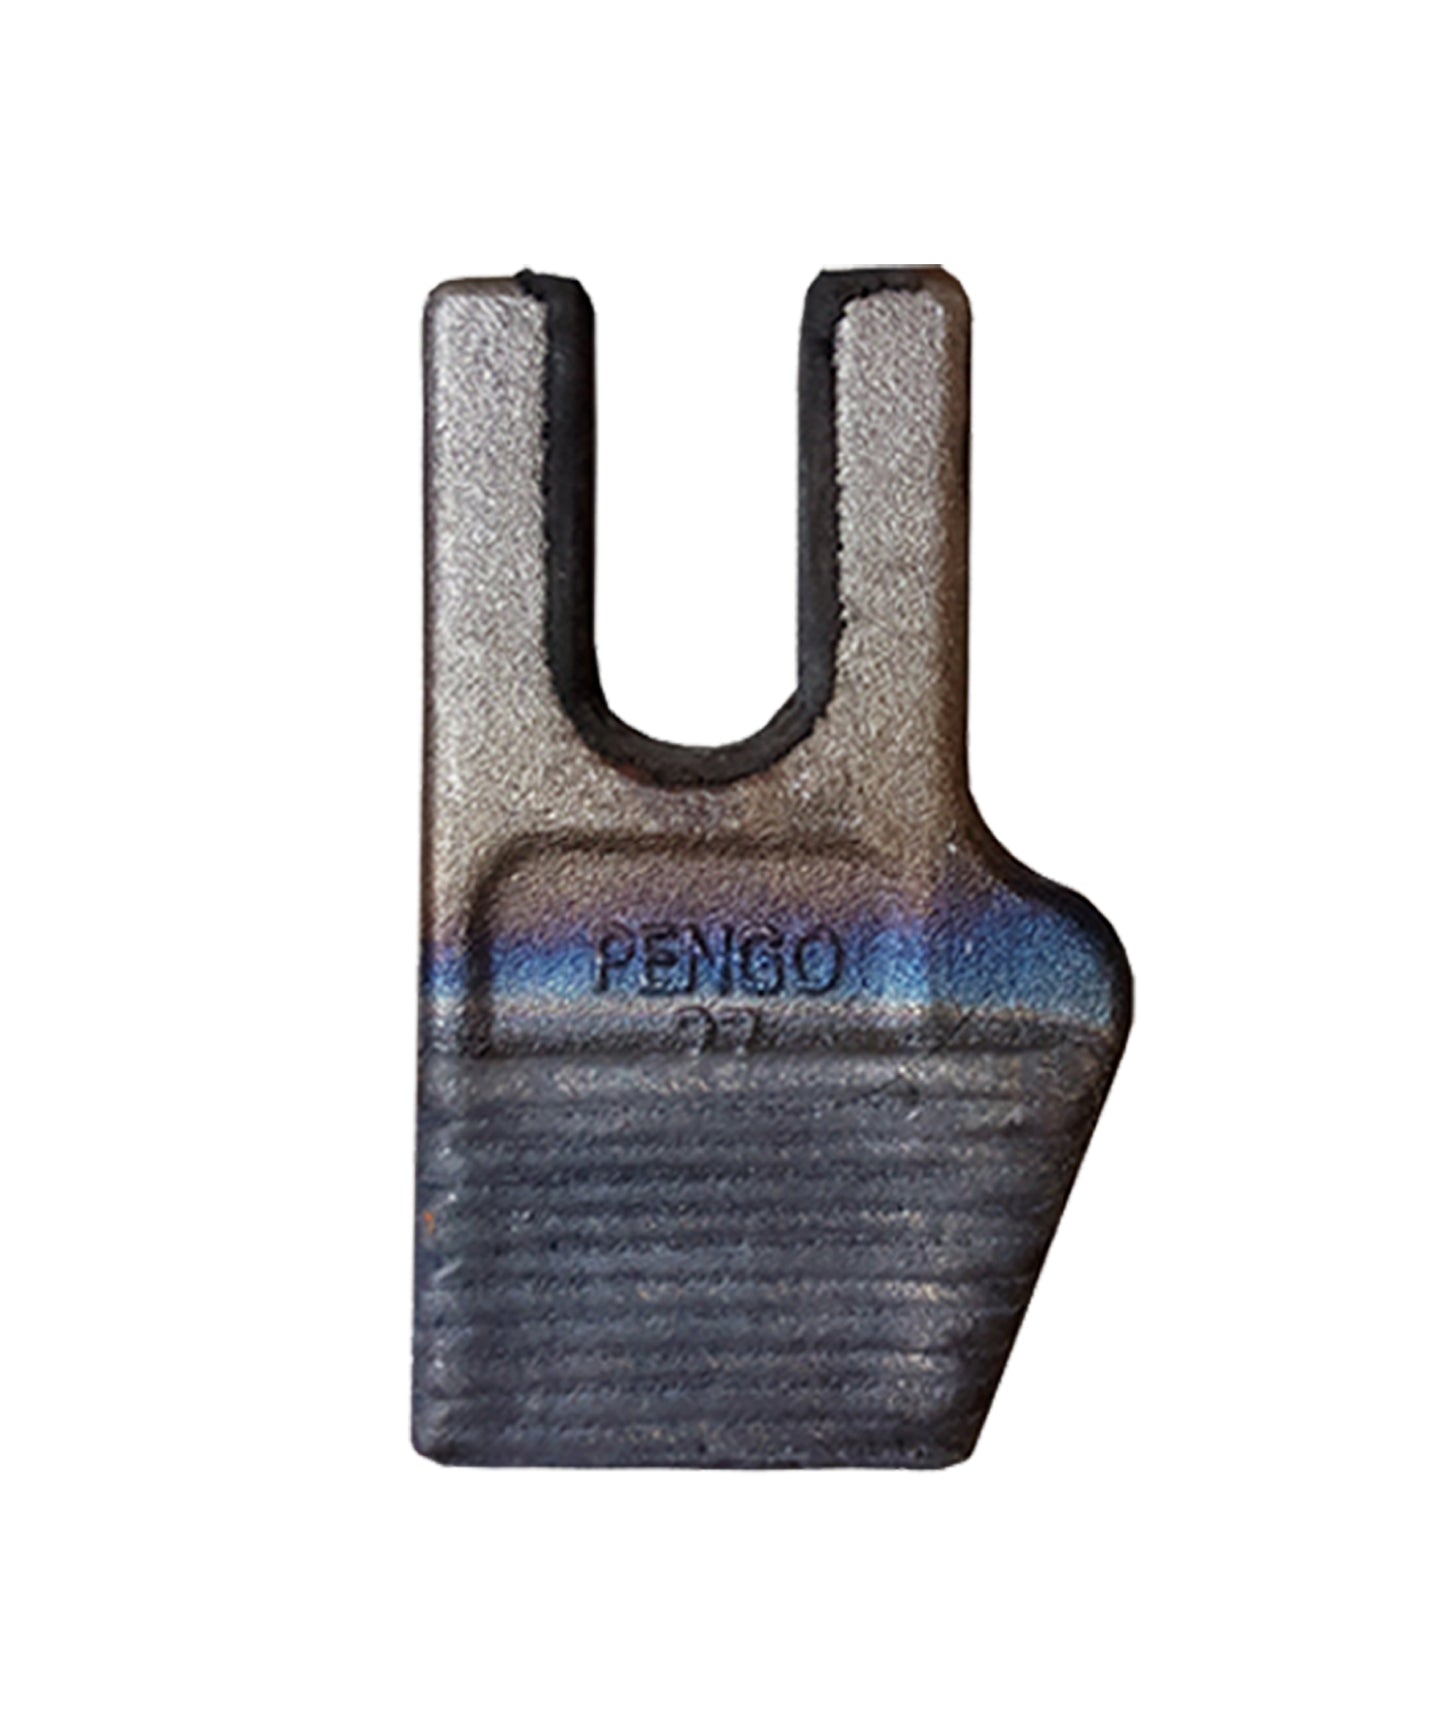 Pengo Auger Tooth-140010 Gage Hard Face 35 Tamaño para CS y AG Aggressor Auger